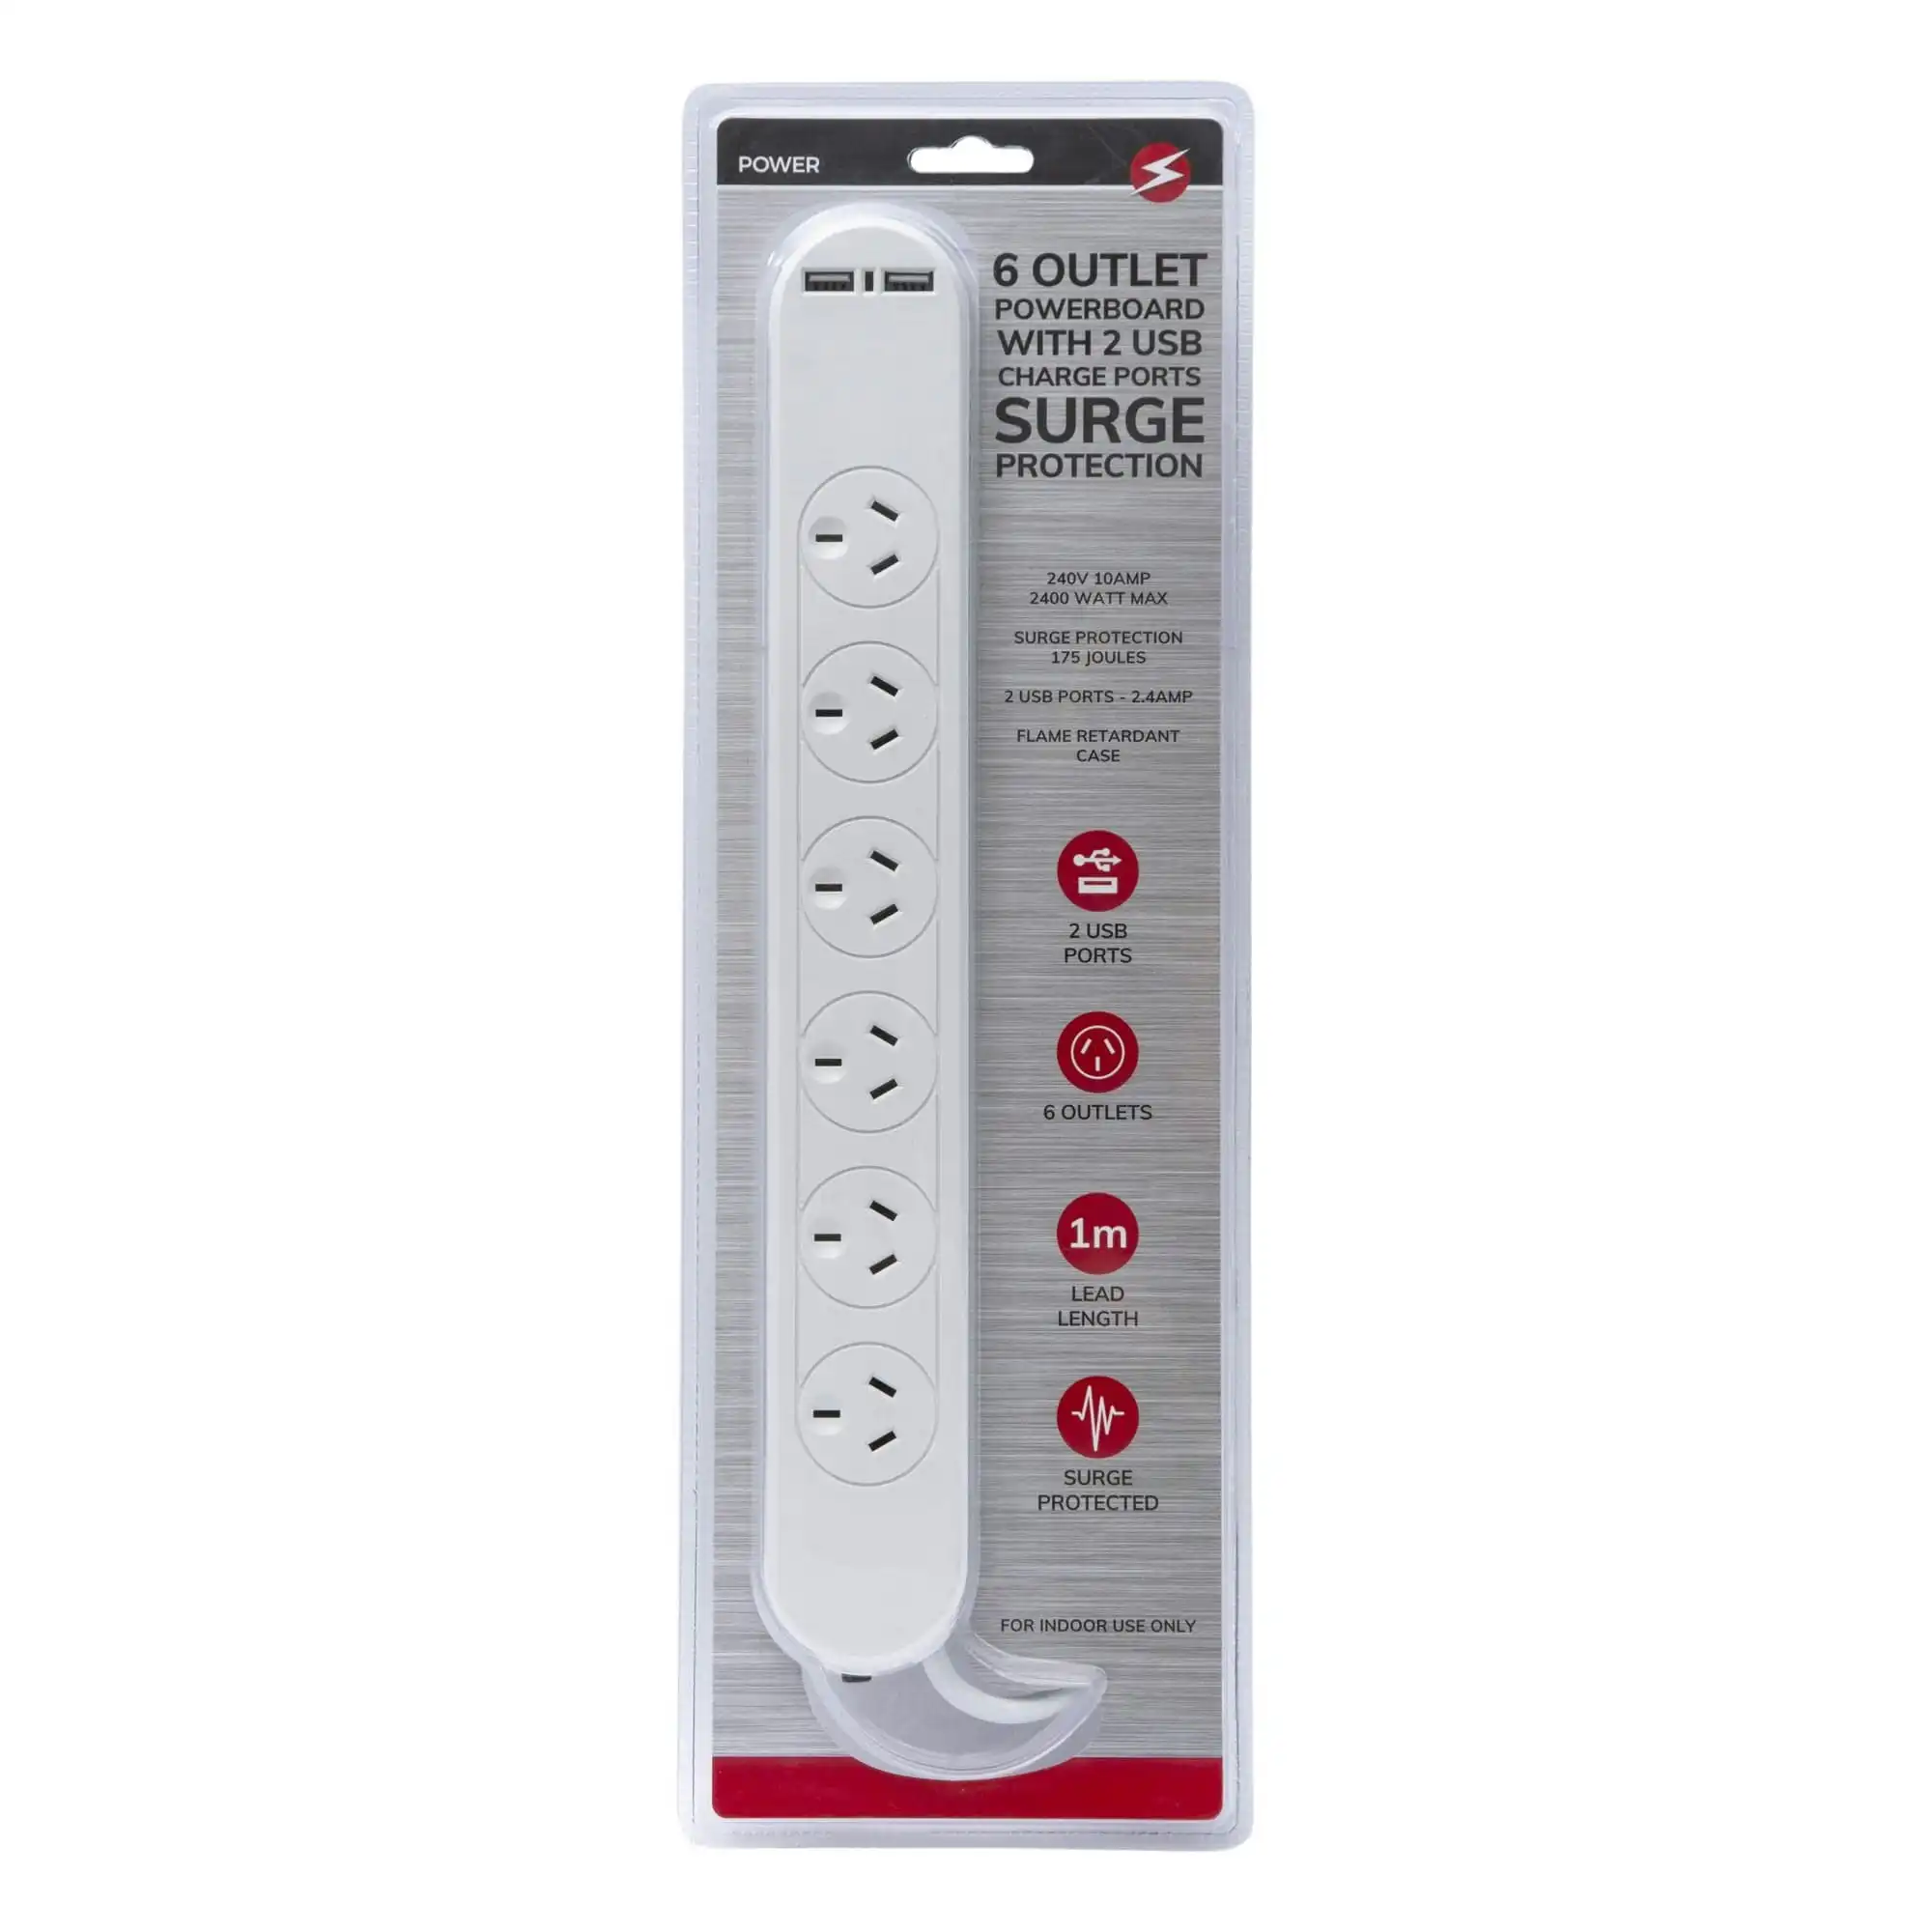 6 Outlet Powerboard With Surge Protection and Dual USB Charger 1M Lead Cable